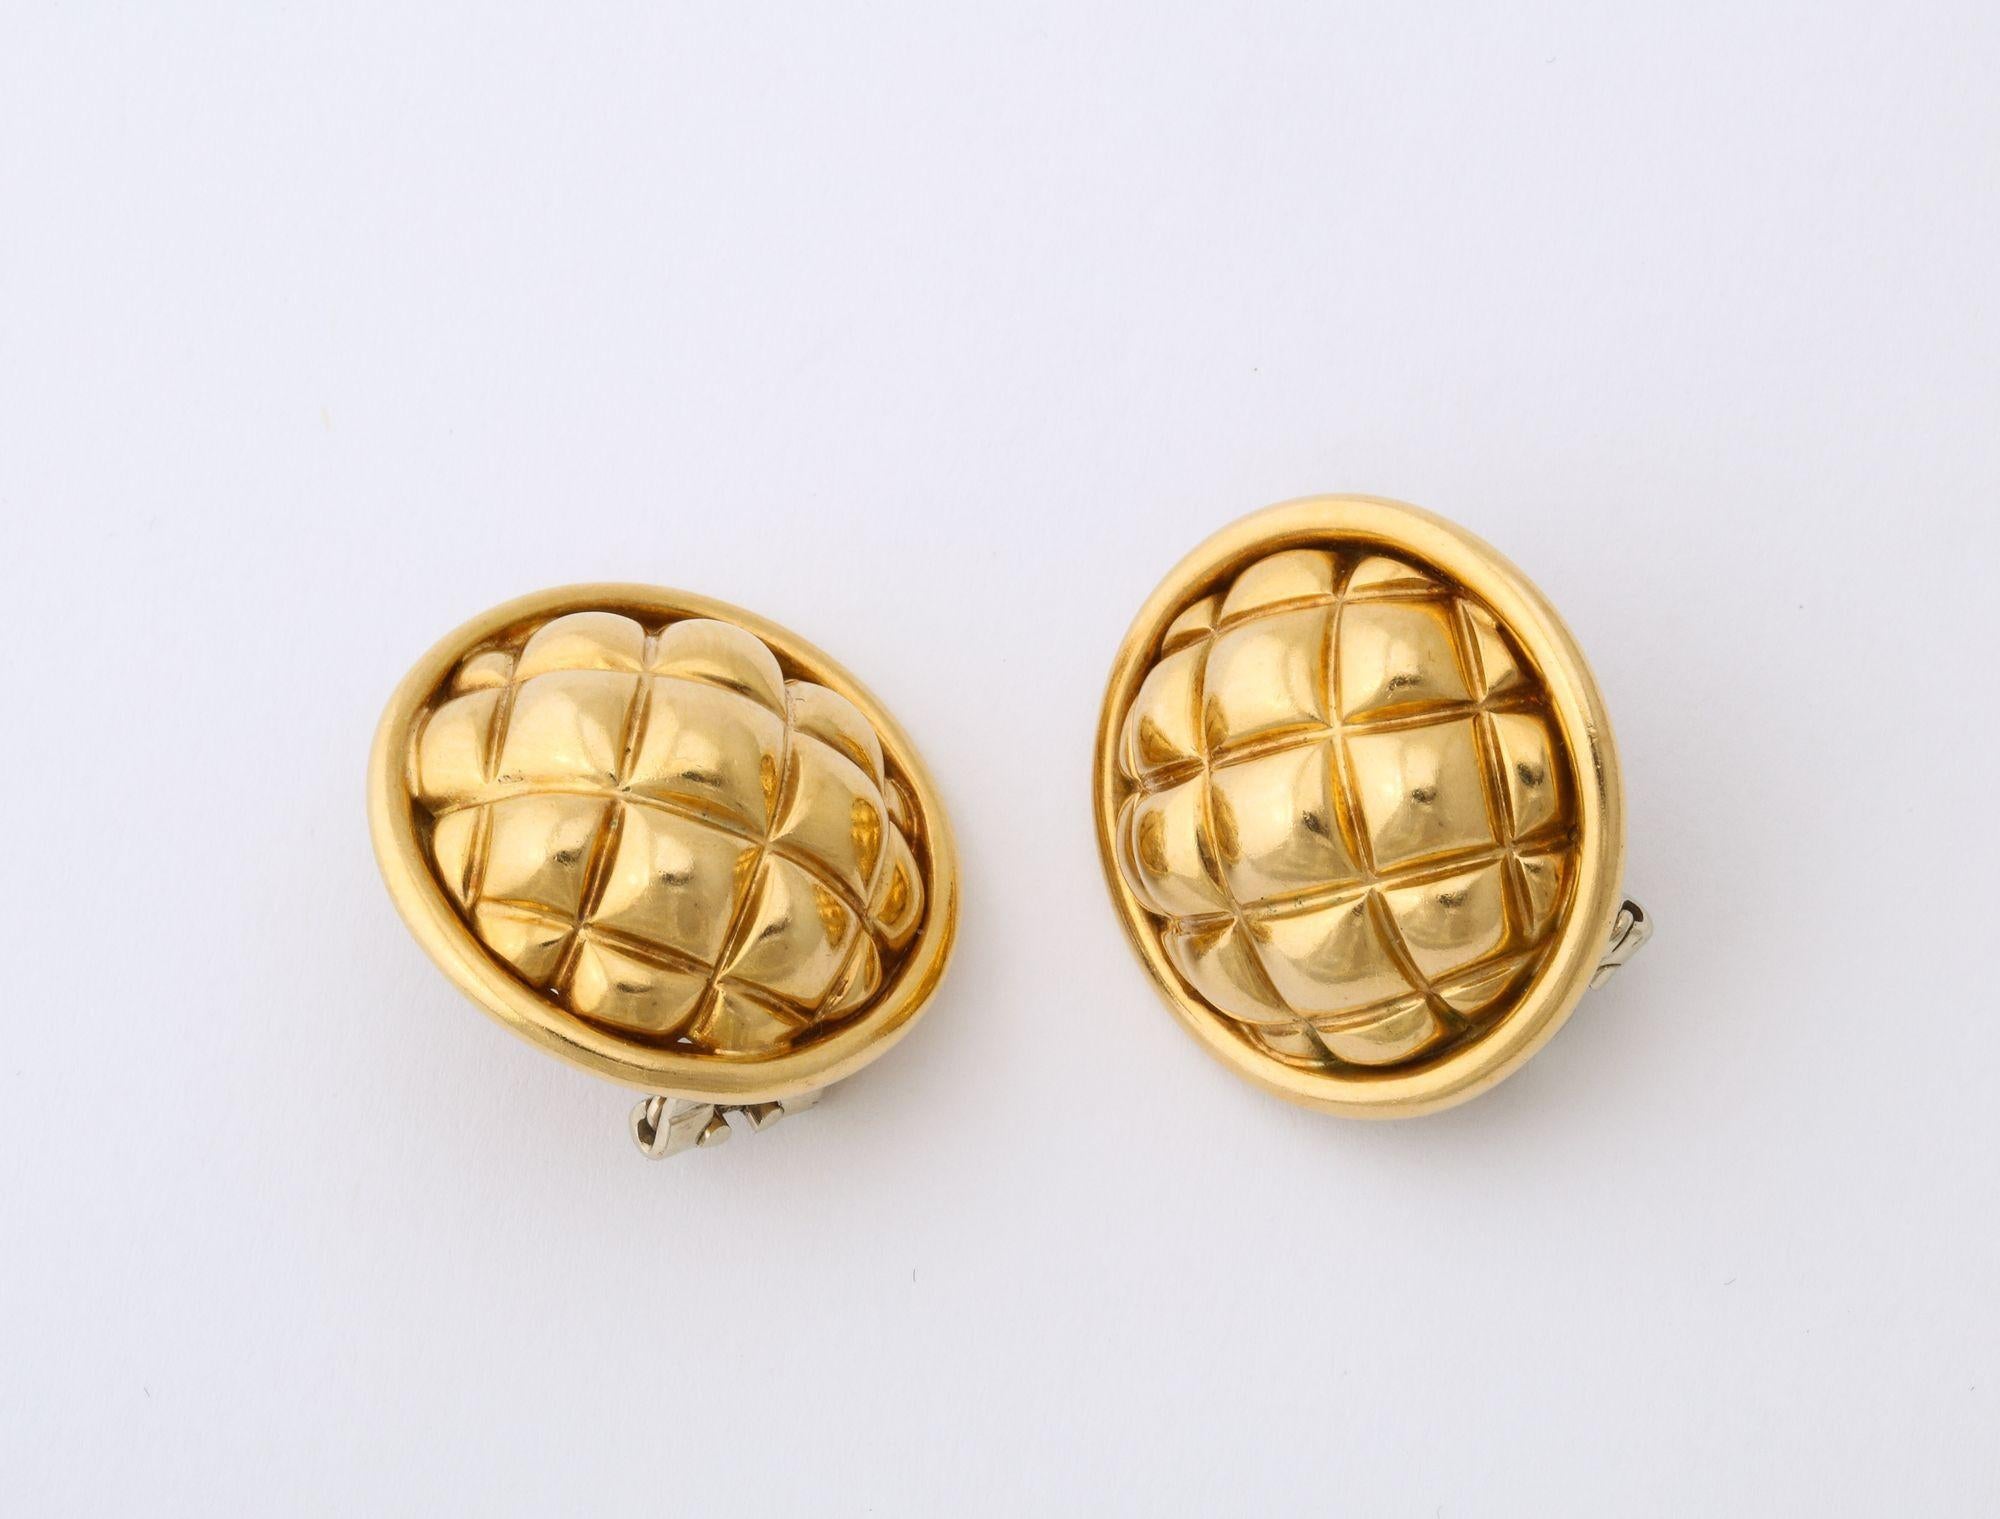 Retro Chaumet 18 K Quilted Clip Earrings